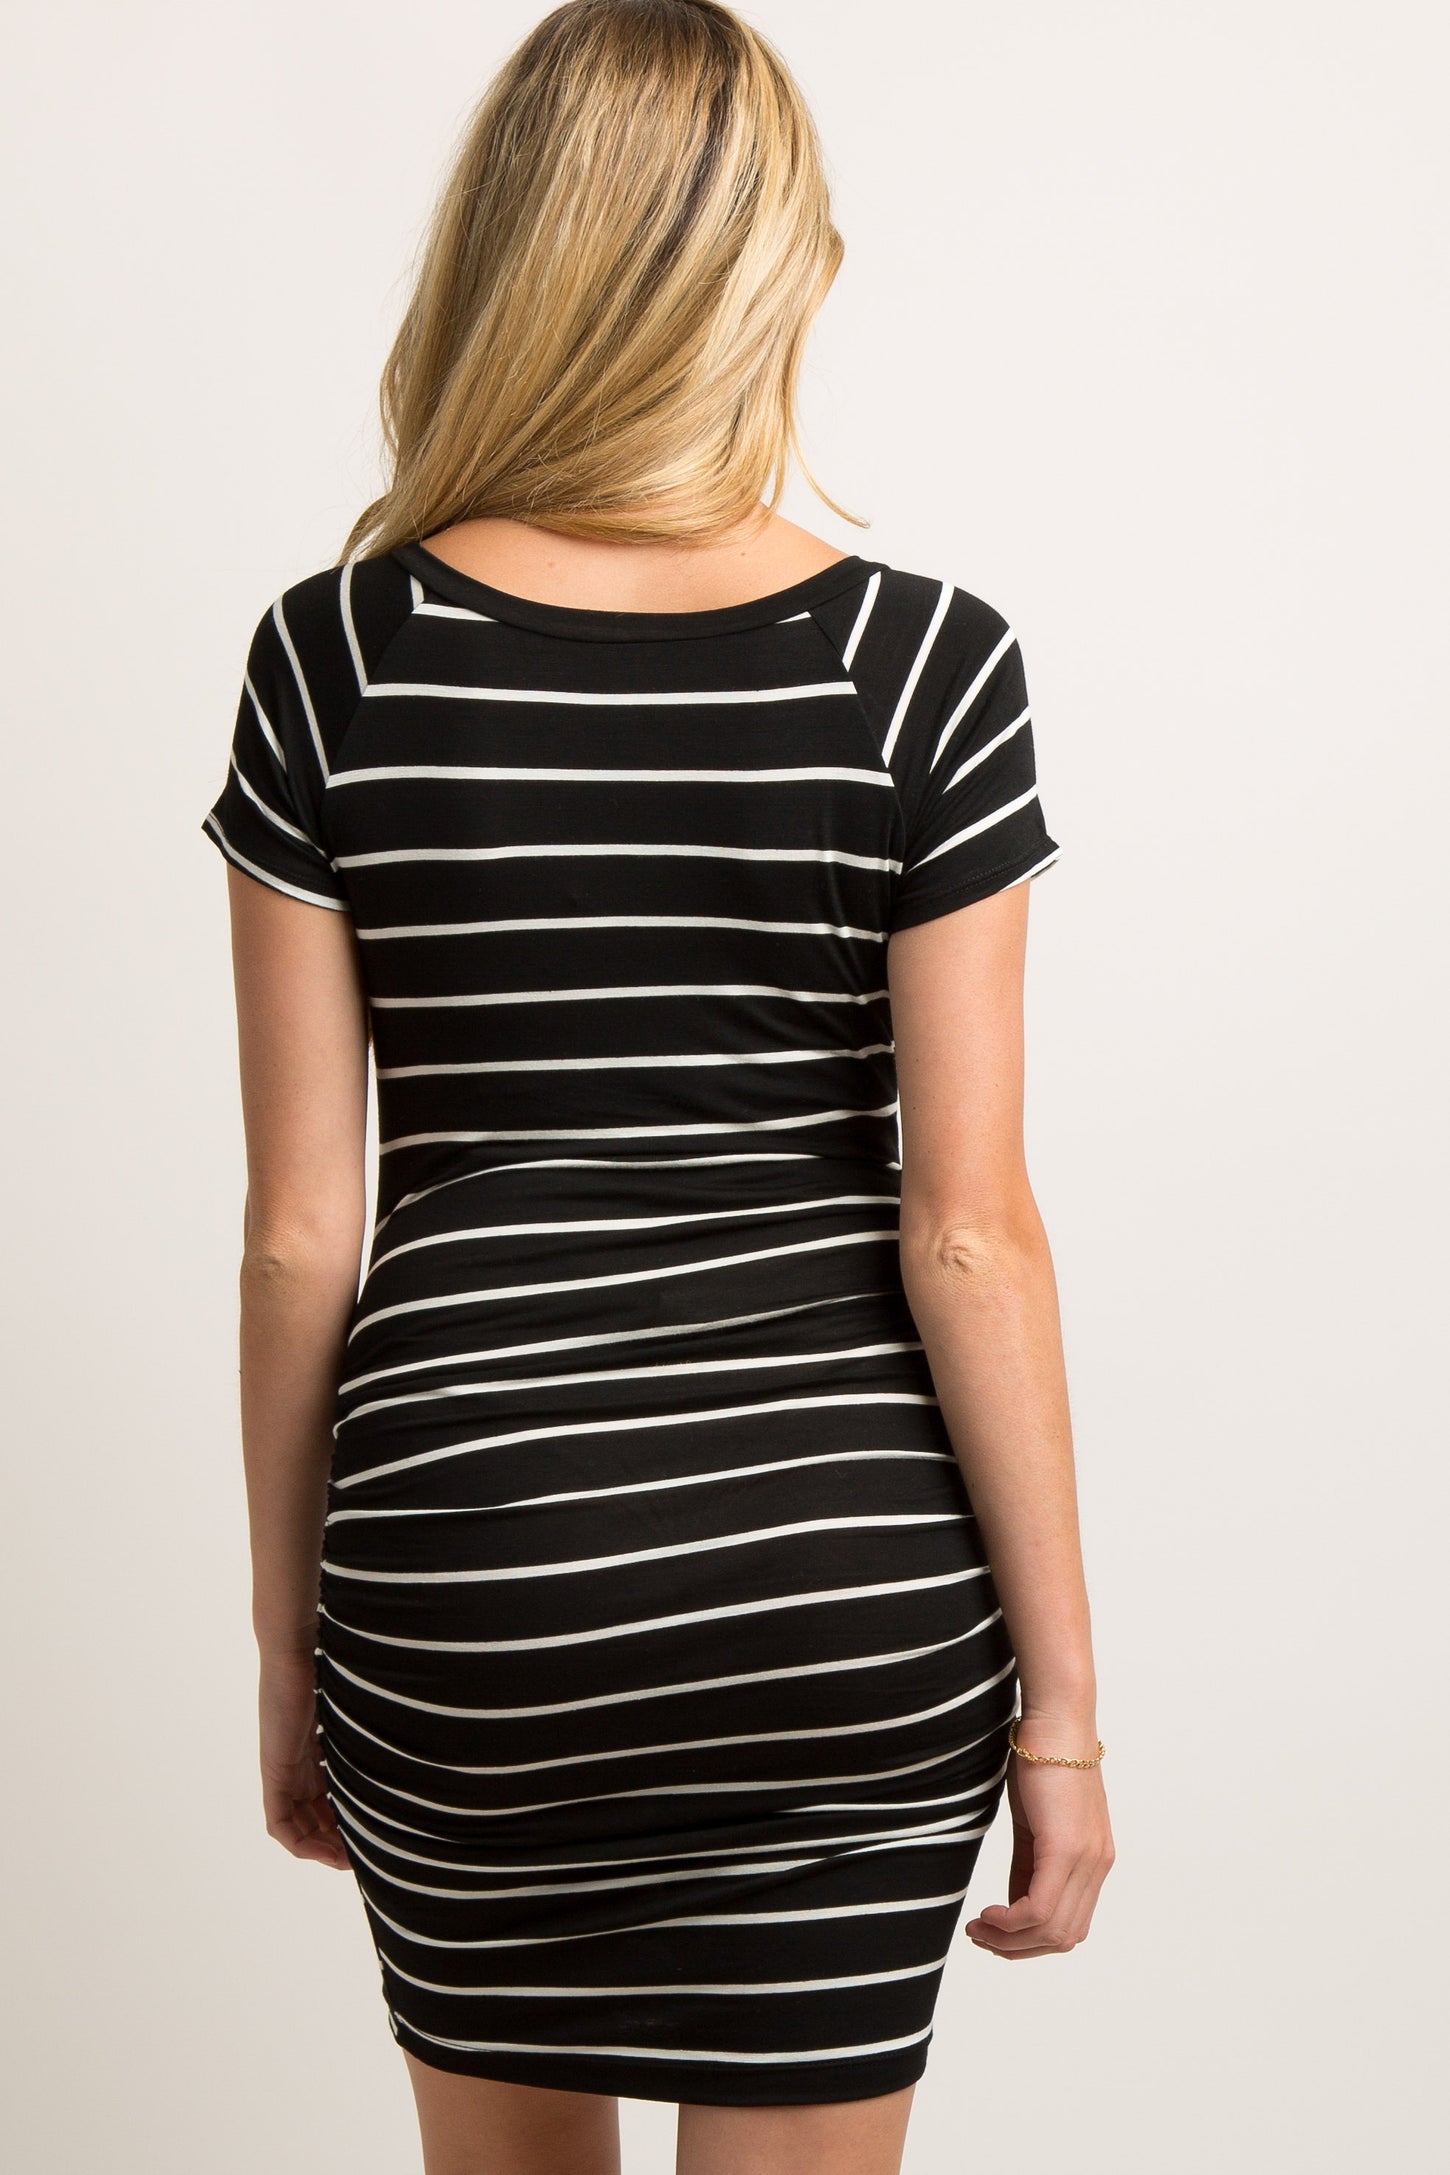 Black Striped Ruched Bodycon Maternity Dress